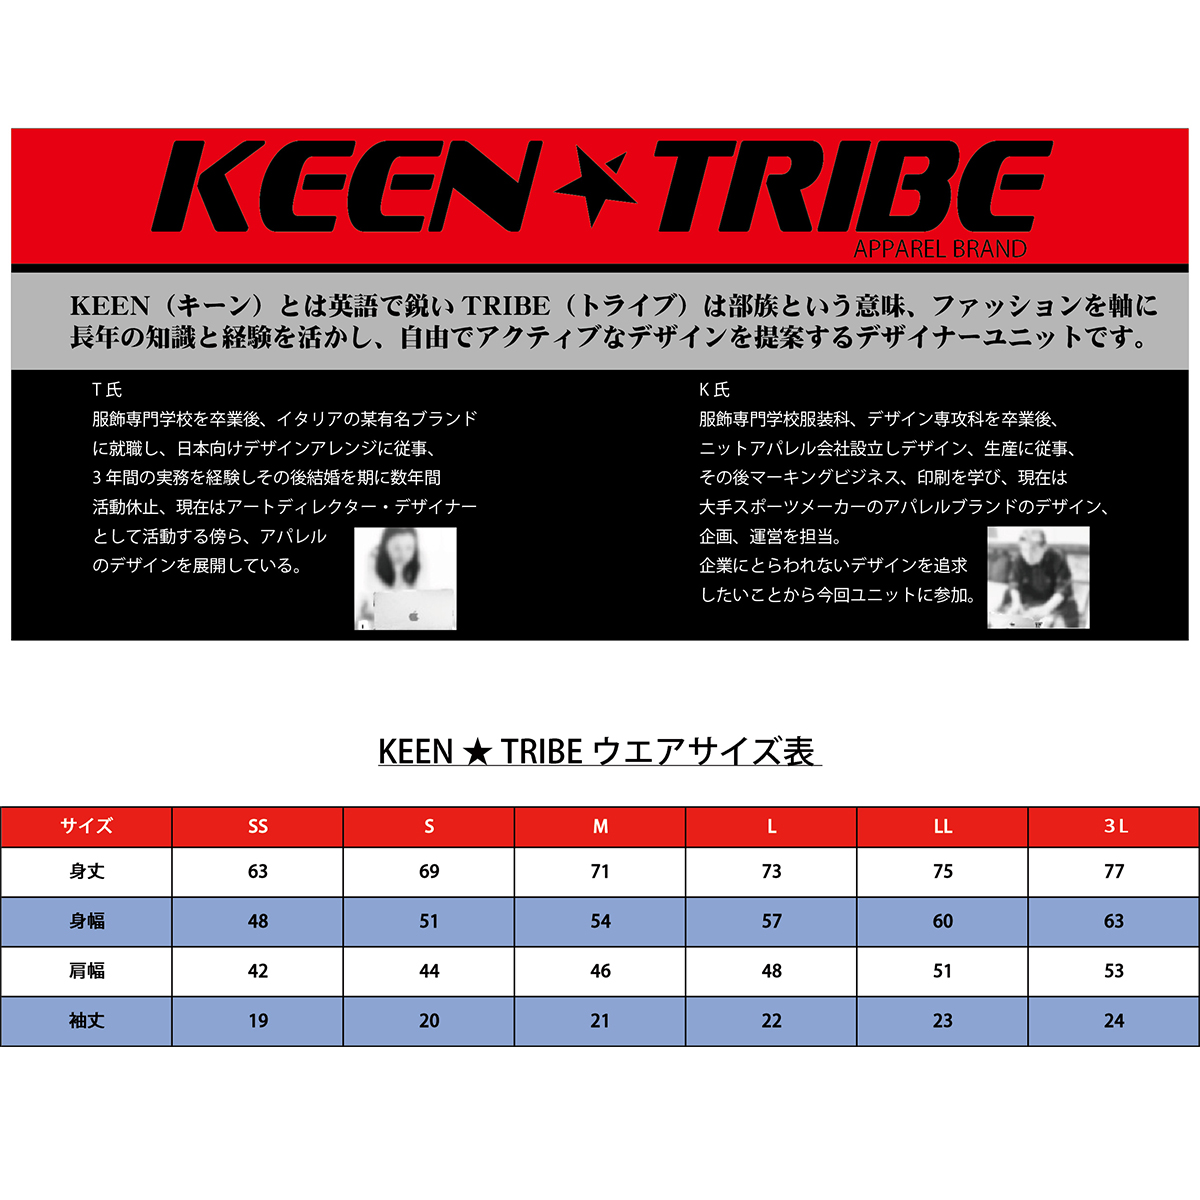 KEEN ★ TRIBE　KT-46(受注生産)